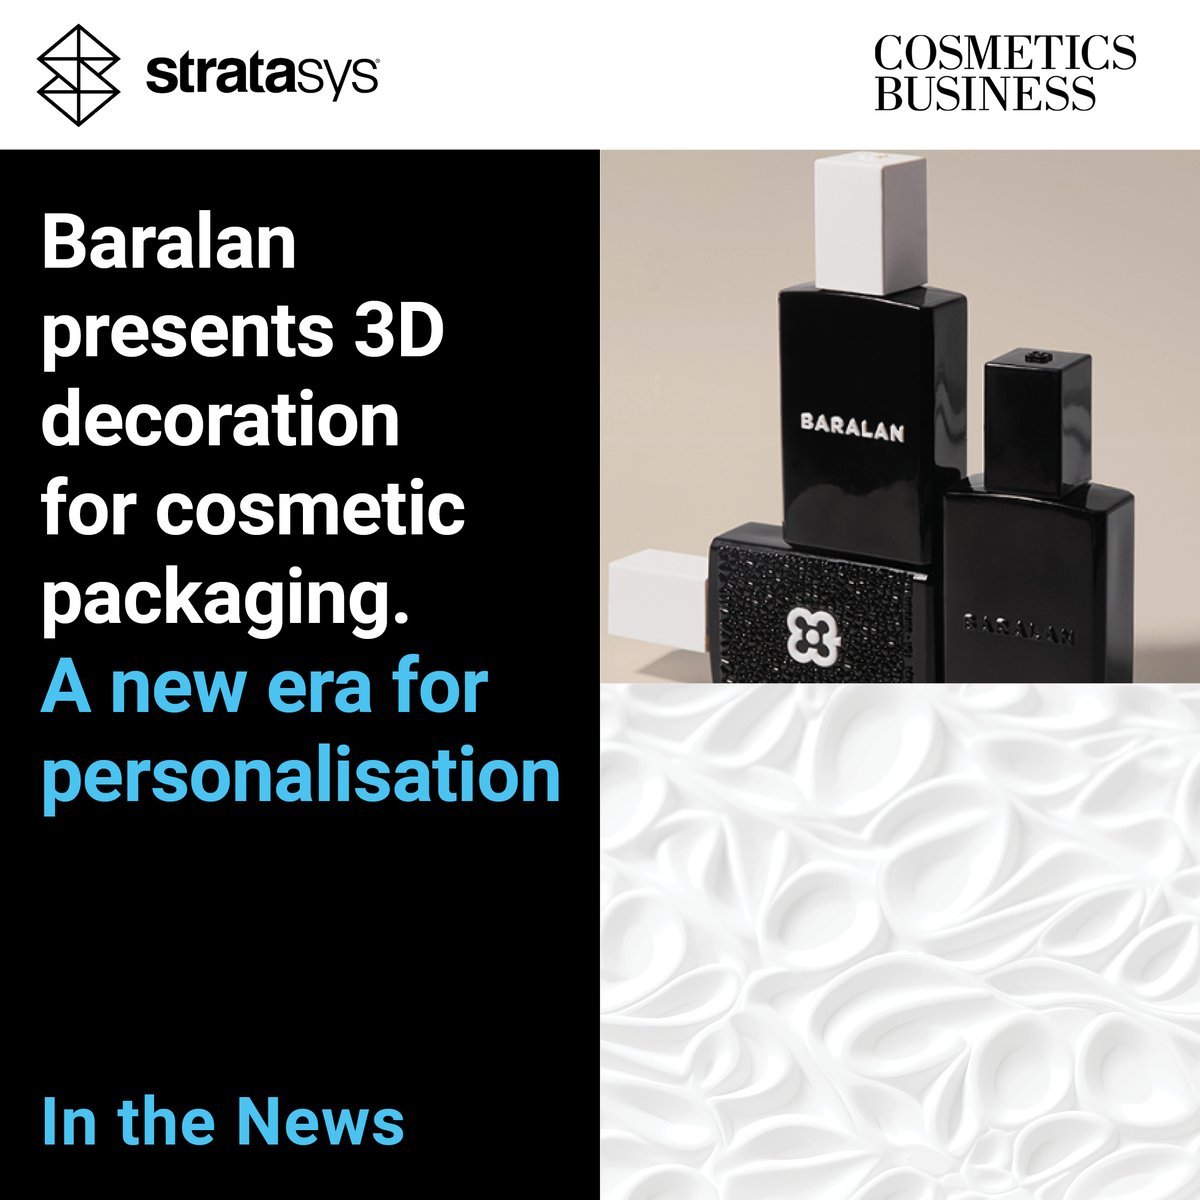 Proud of this collaboration with Baralan that brings together the innovative character of the companies involved.

Read here how 3D printing offers great potential to the world of cosmetic packaging >> okt.to/CjWt6w

#MakeAdditiveWorkForYou #addstratasys